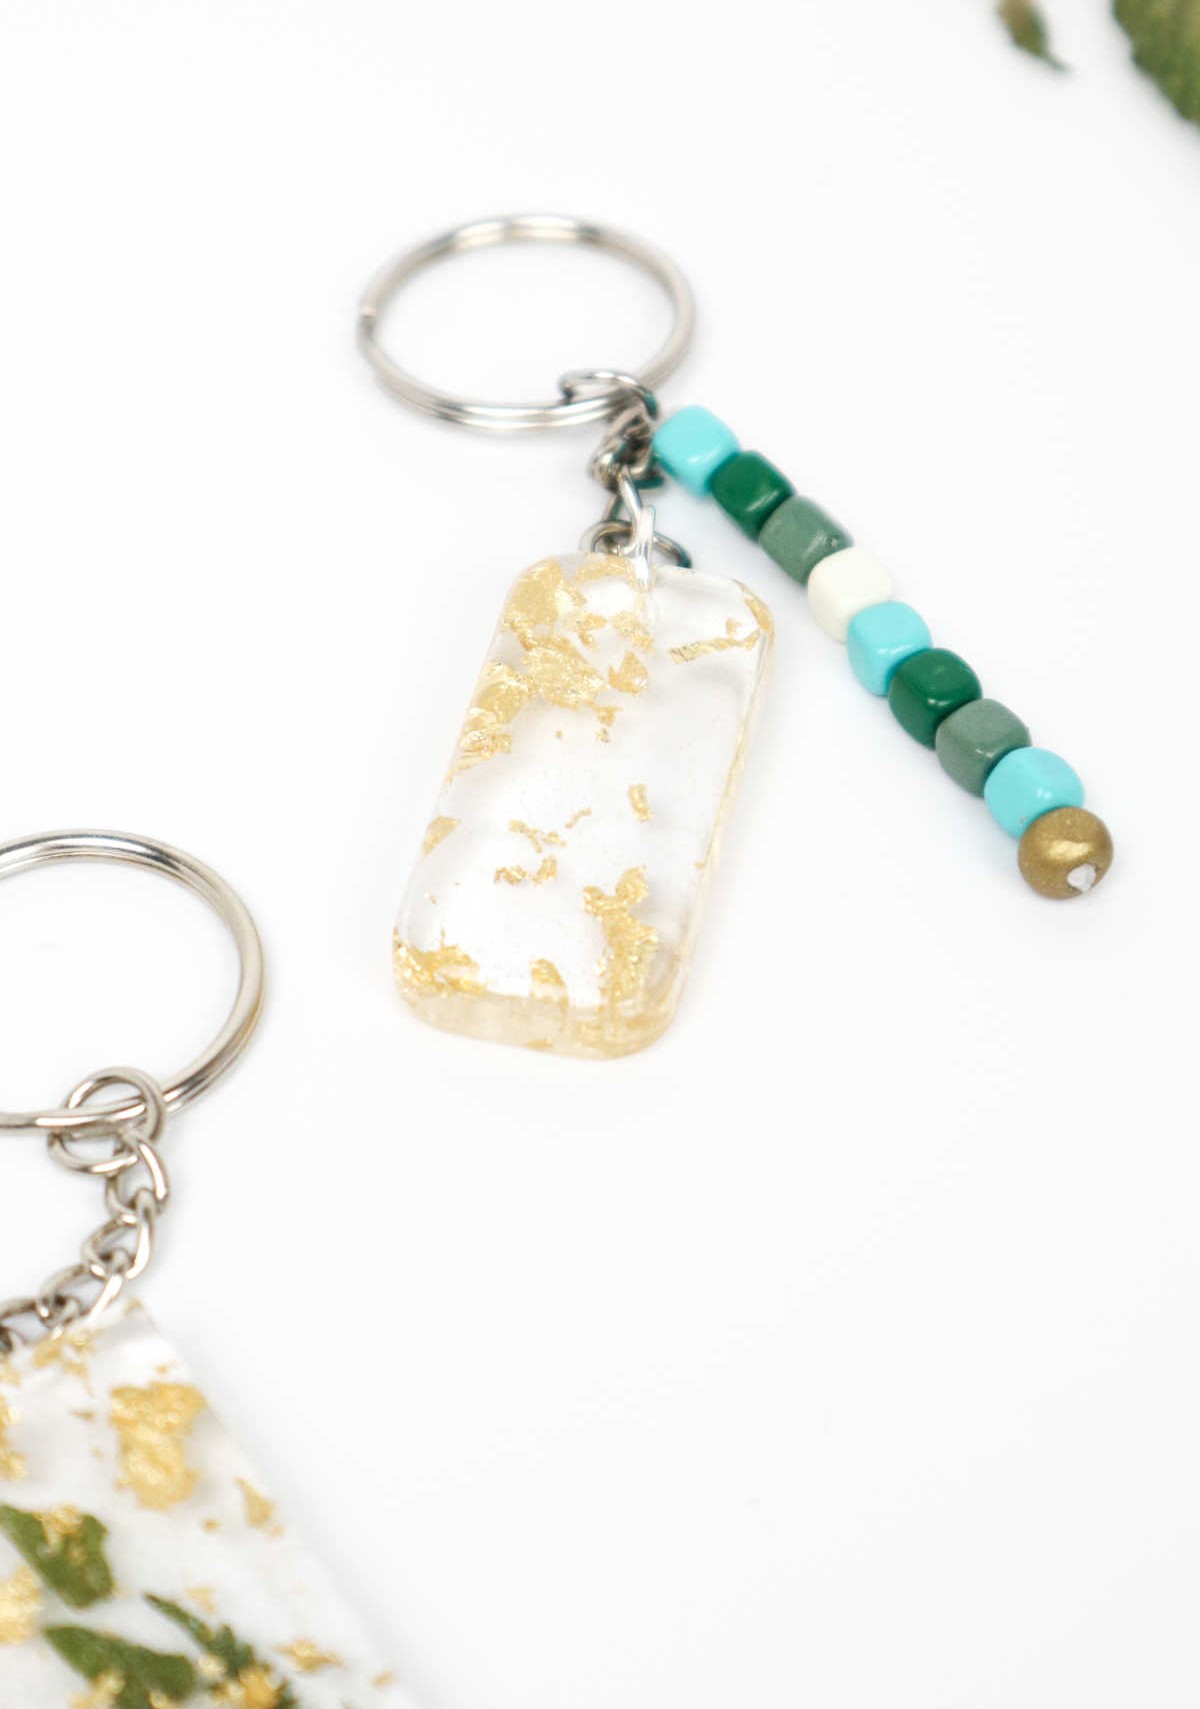 How to Make Resin Keychains (Step-by-Step)